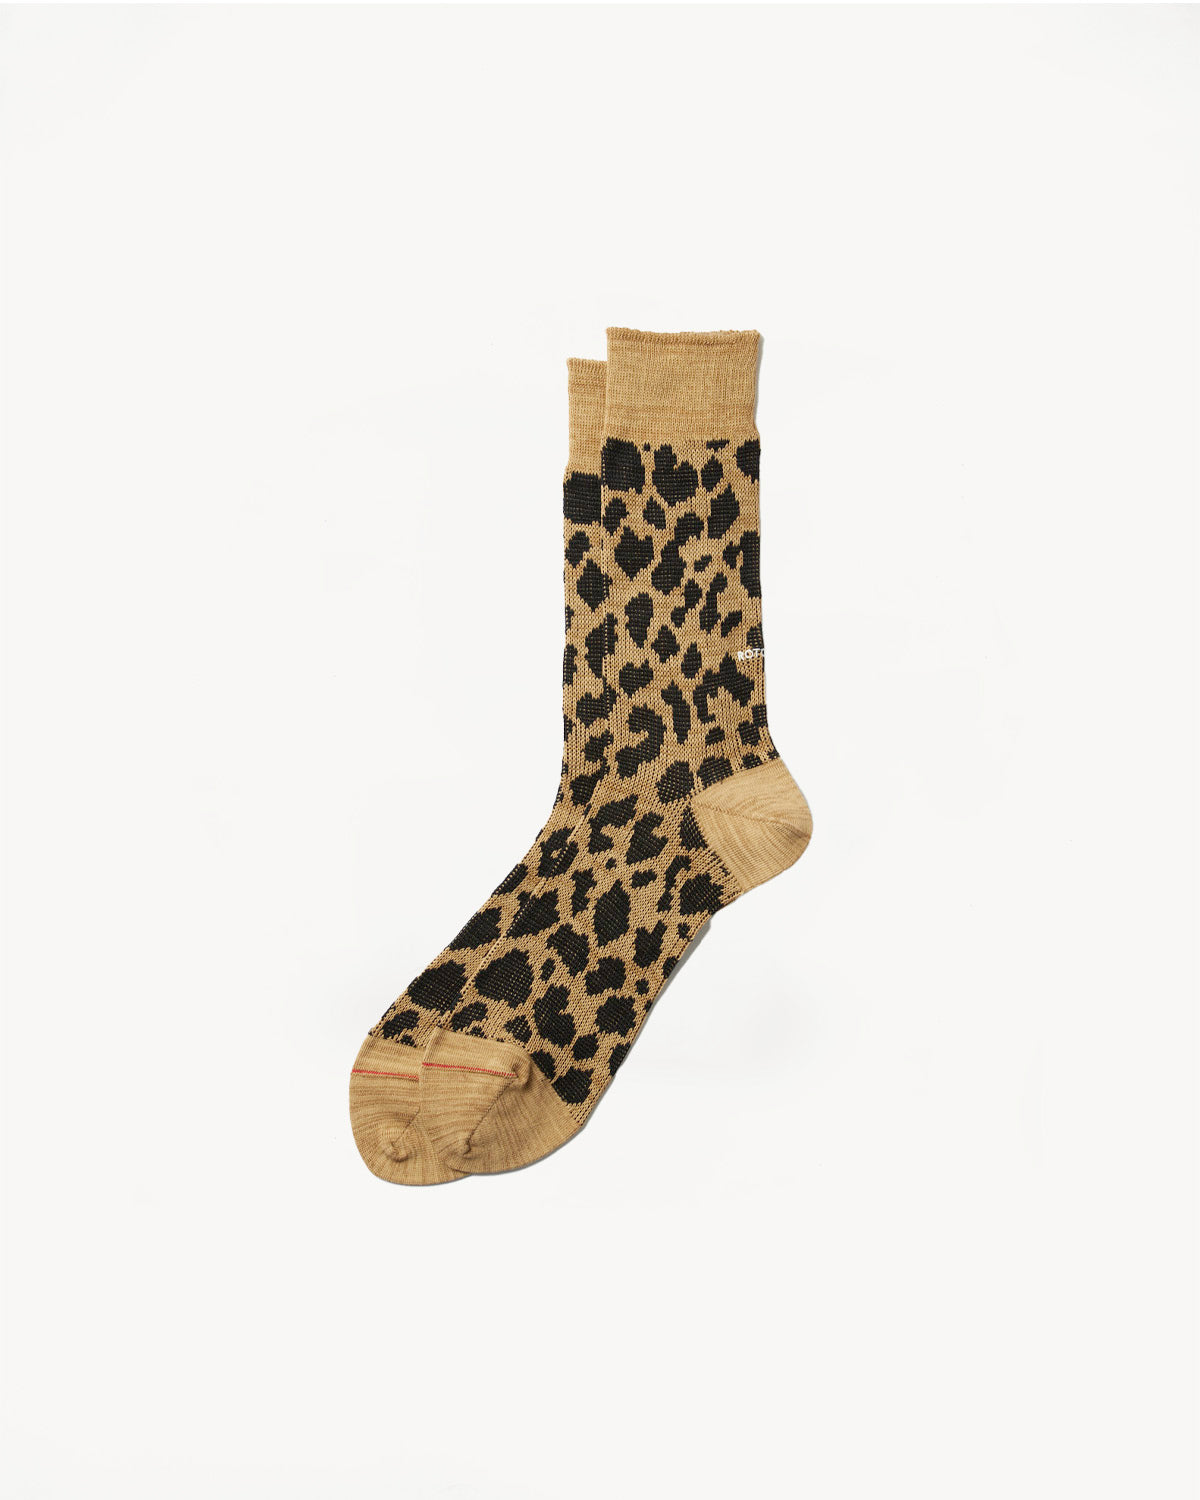 R1418 - Organic Cotton & Recycled Polyester Leopard Crew Sock - Beige